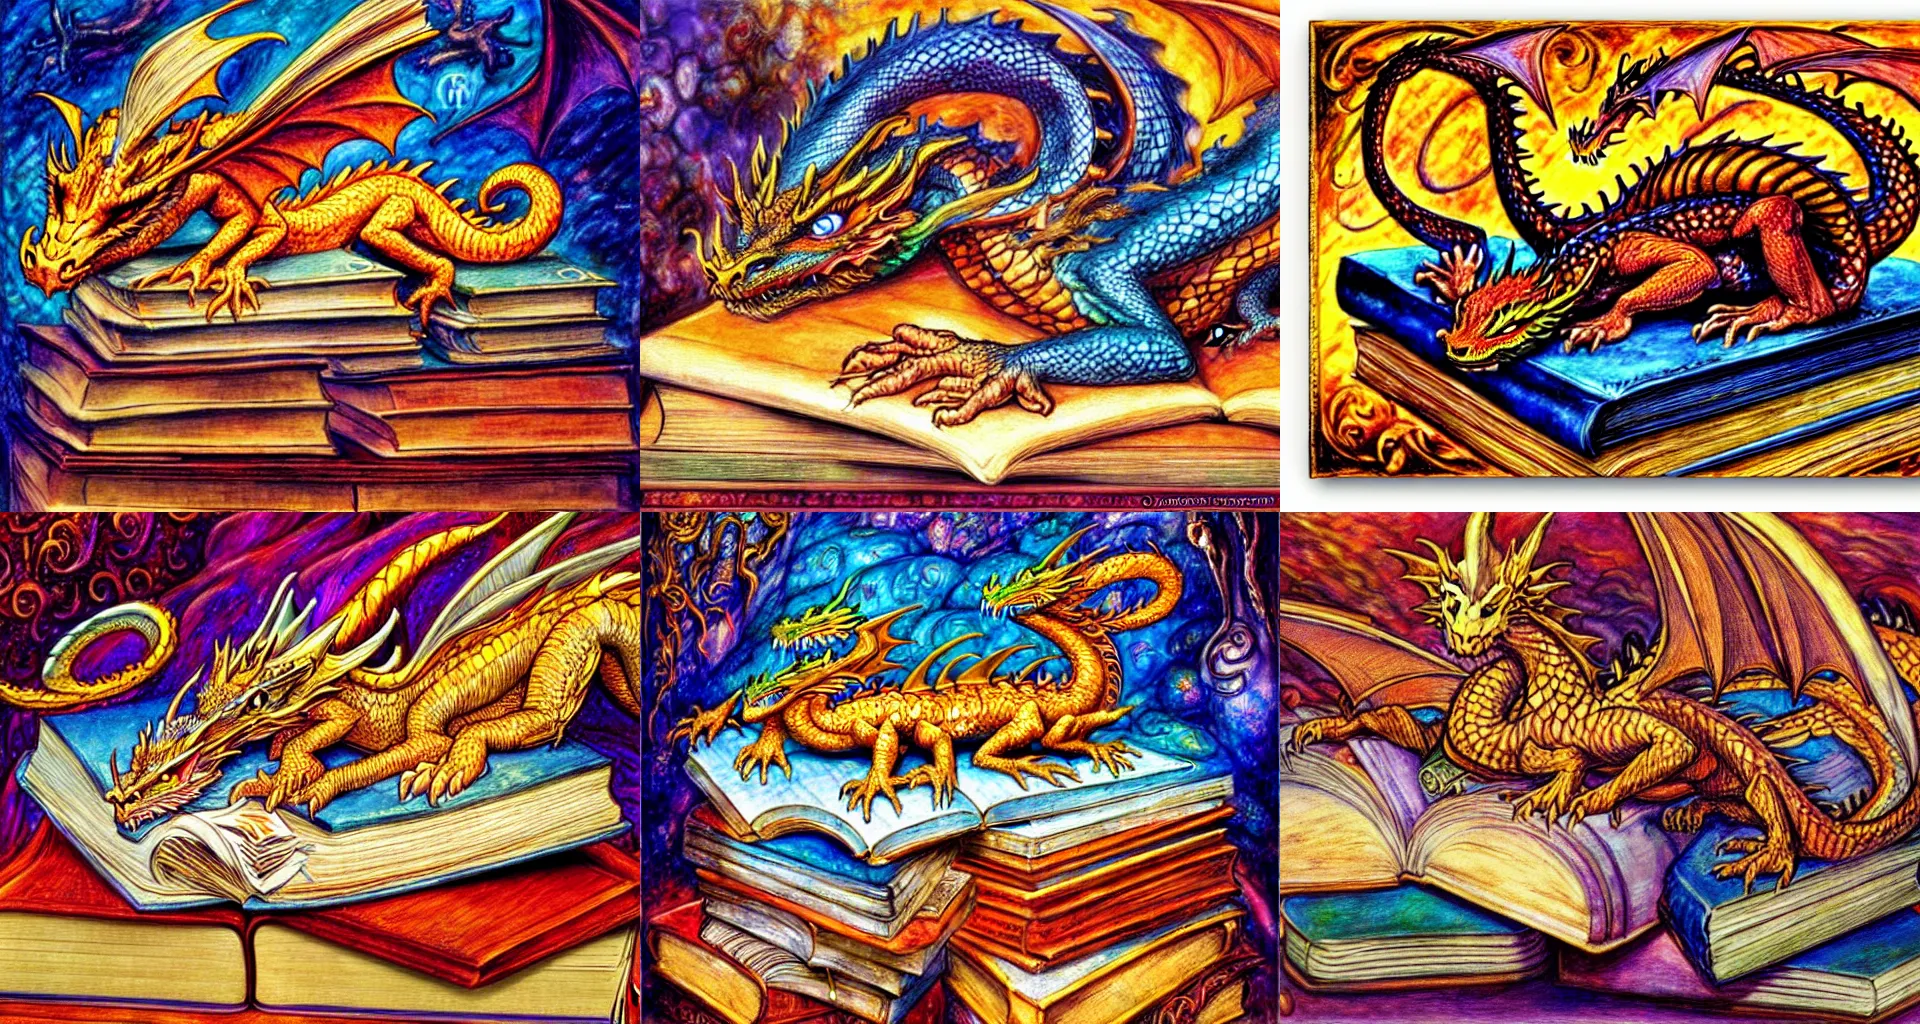 Prompt: A dragon sleeping on a pile of books, by Josephine Wall.